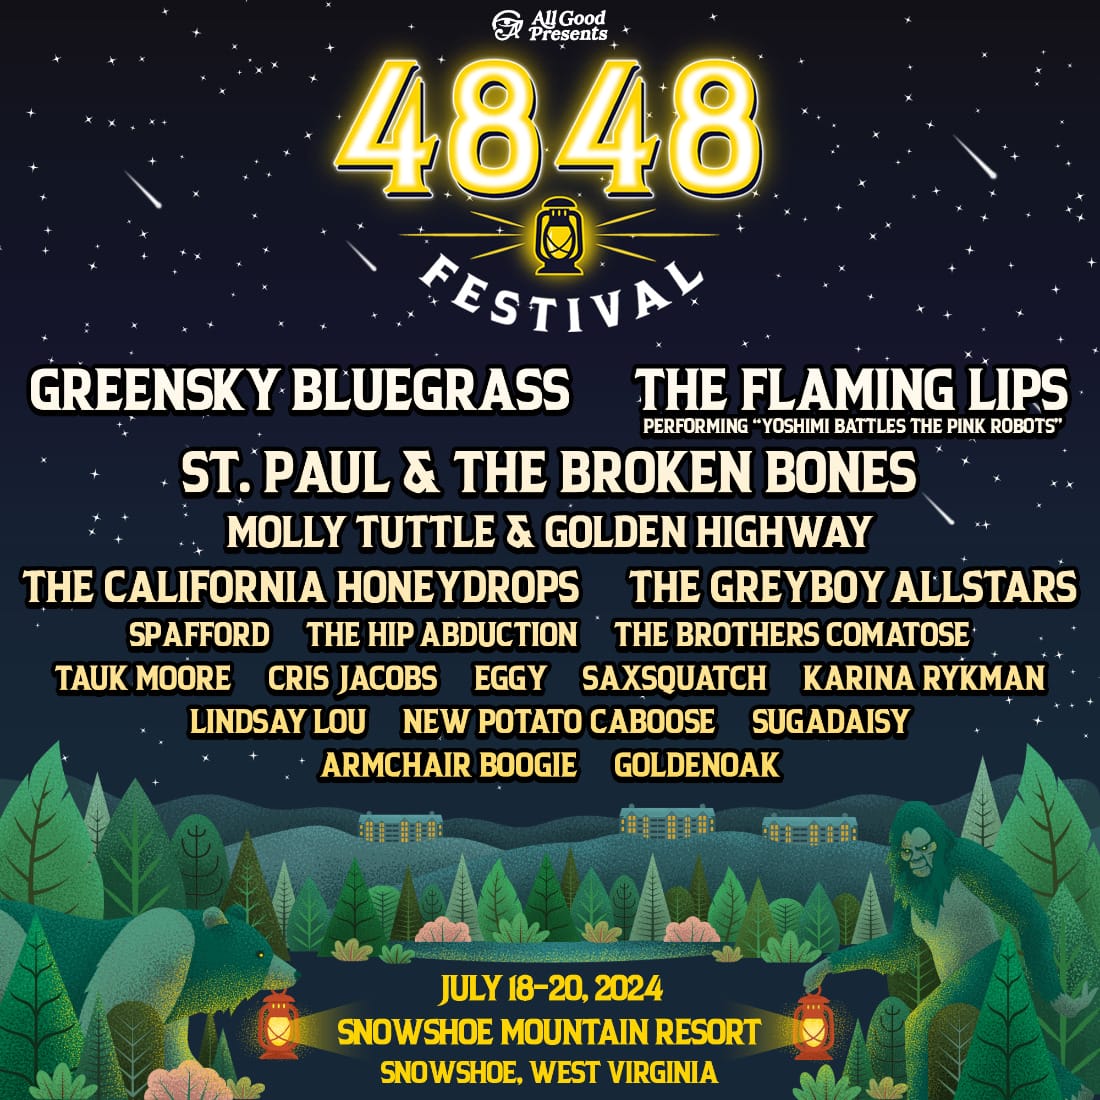 4848 Festival Presents 2024 Lineup Greensky Bluegrass, The Flaming